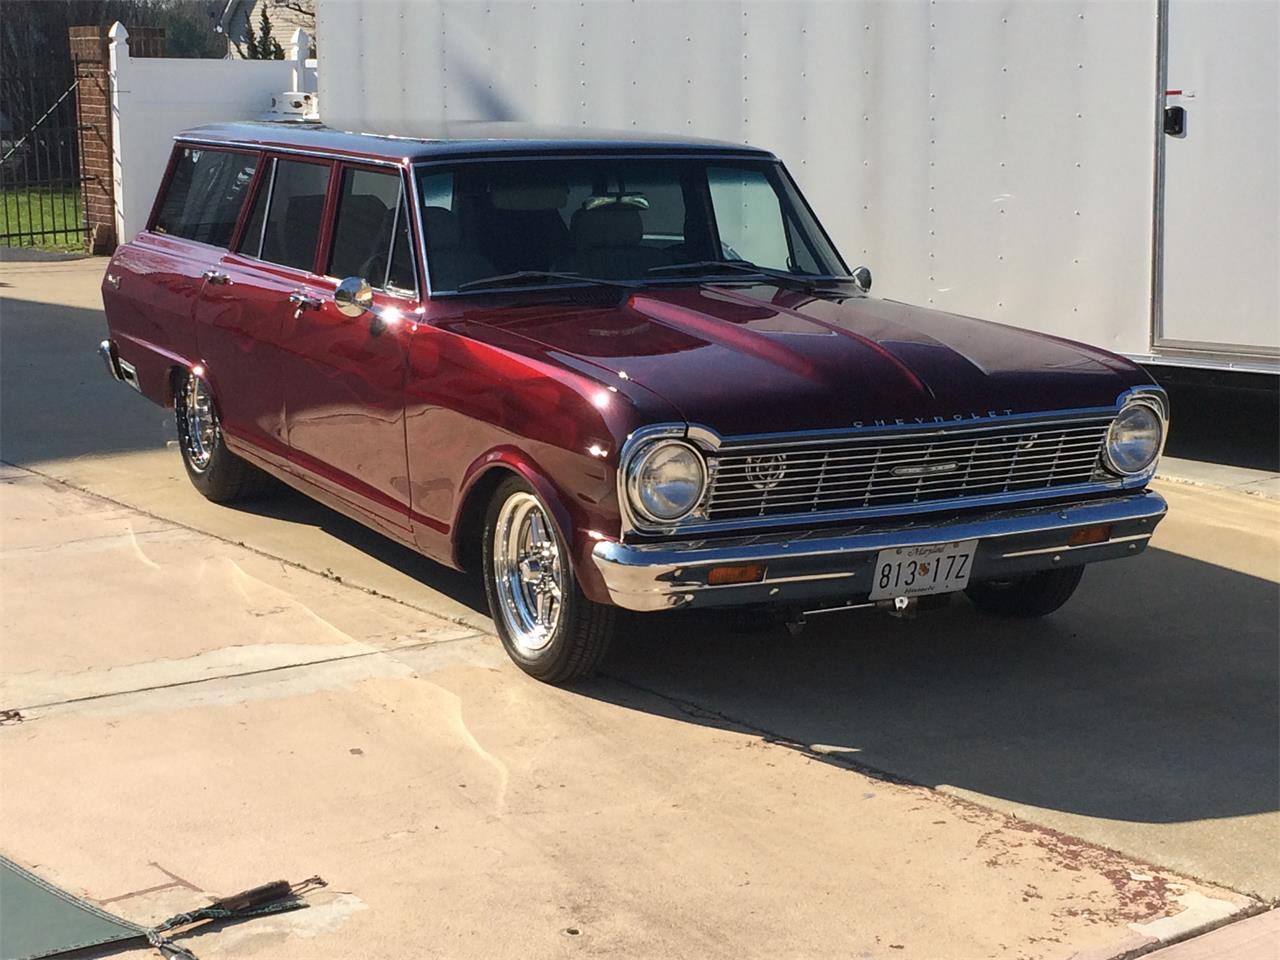 For Sale: 1965 Chevrolet Chevy II Nova in Chestertown, Maryland.